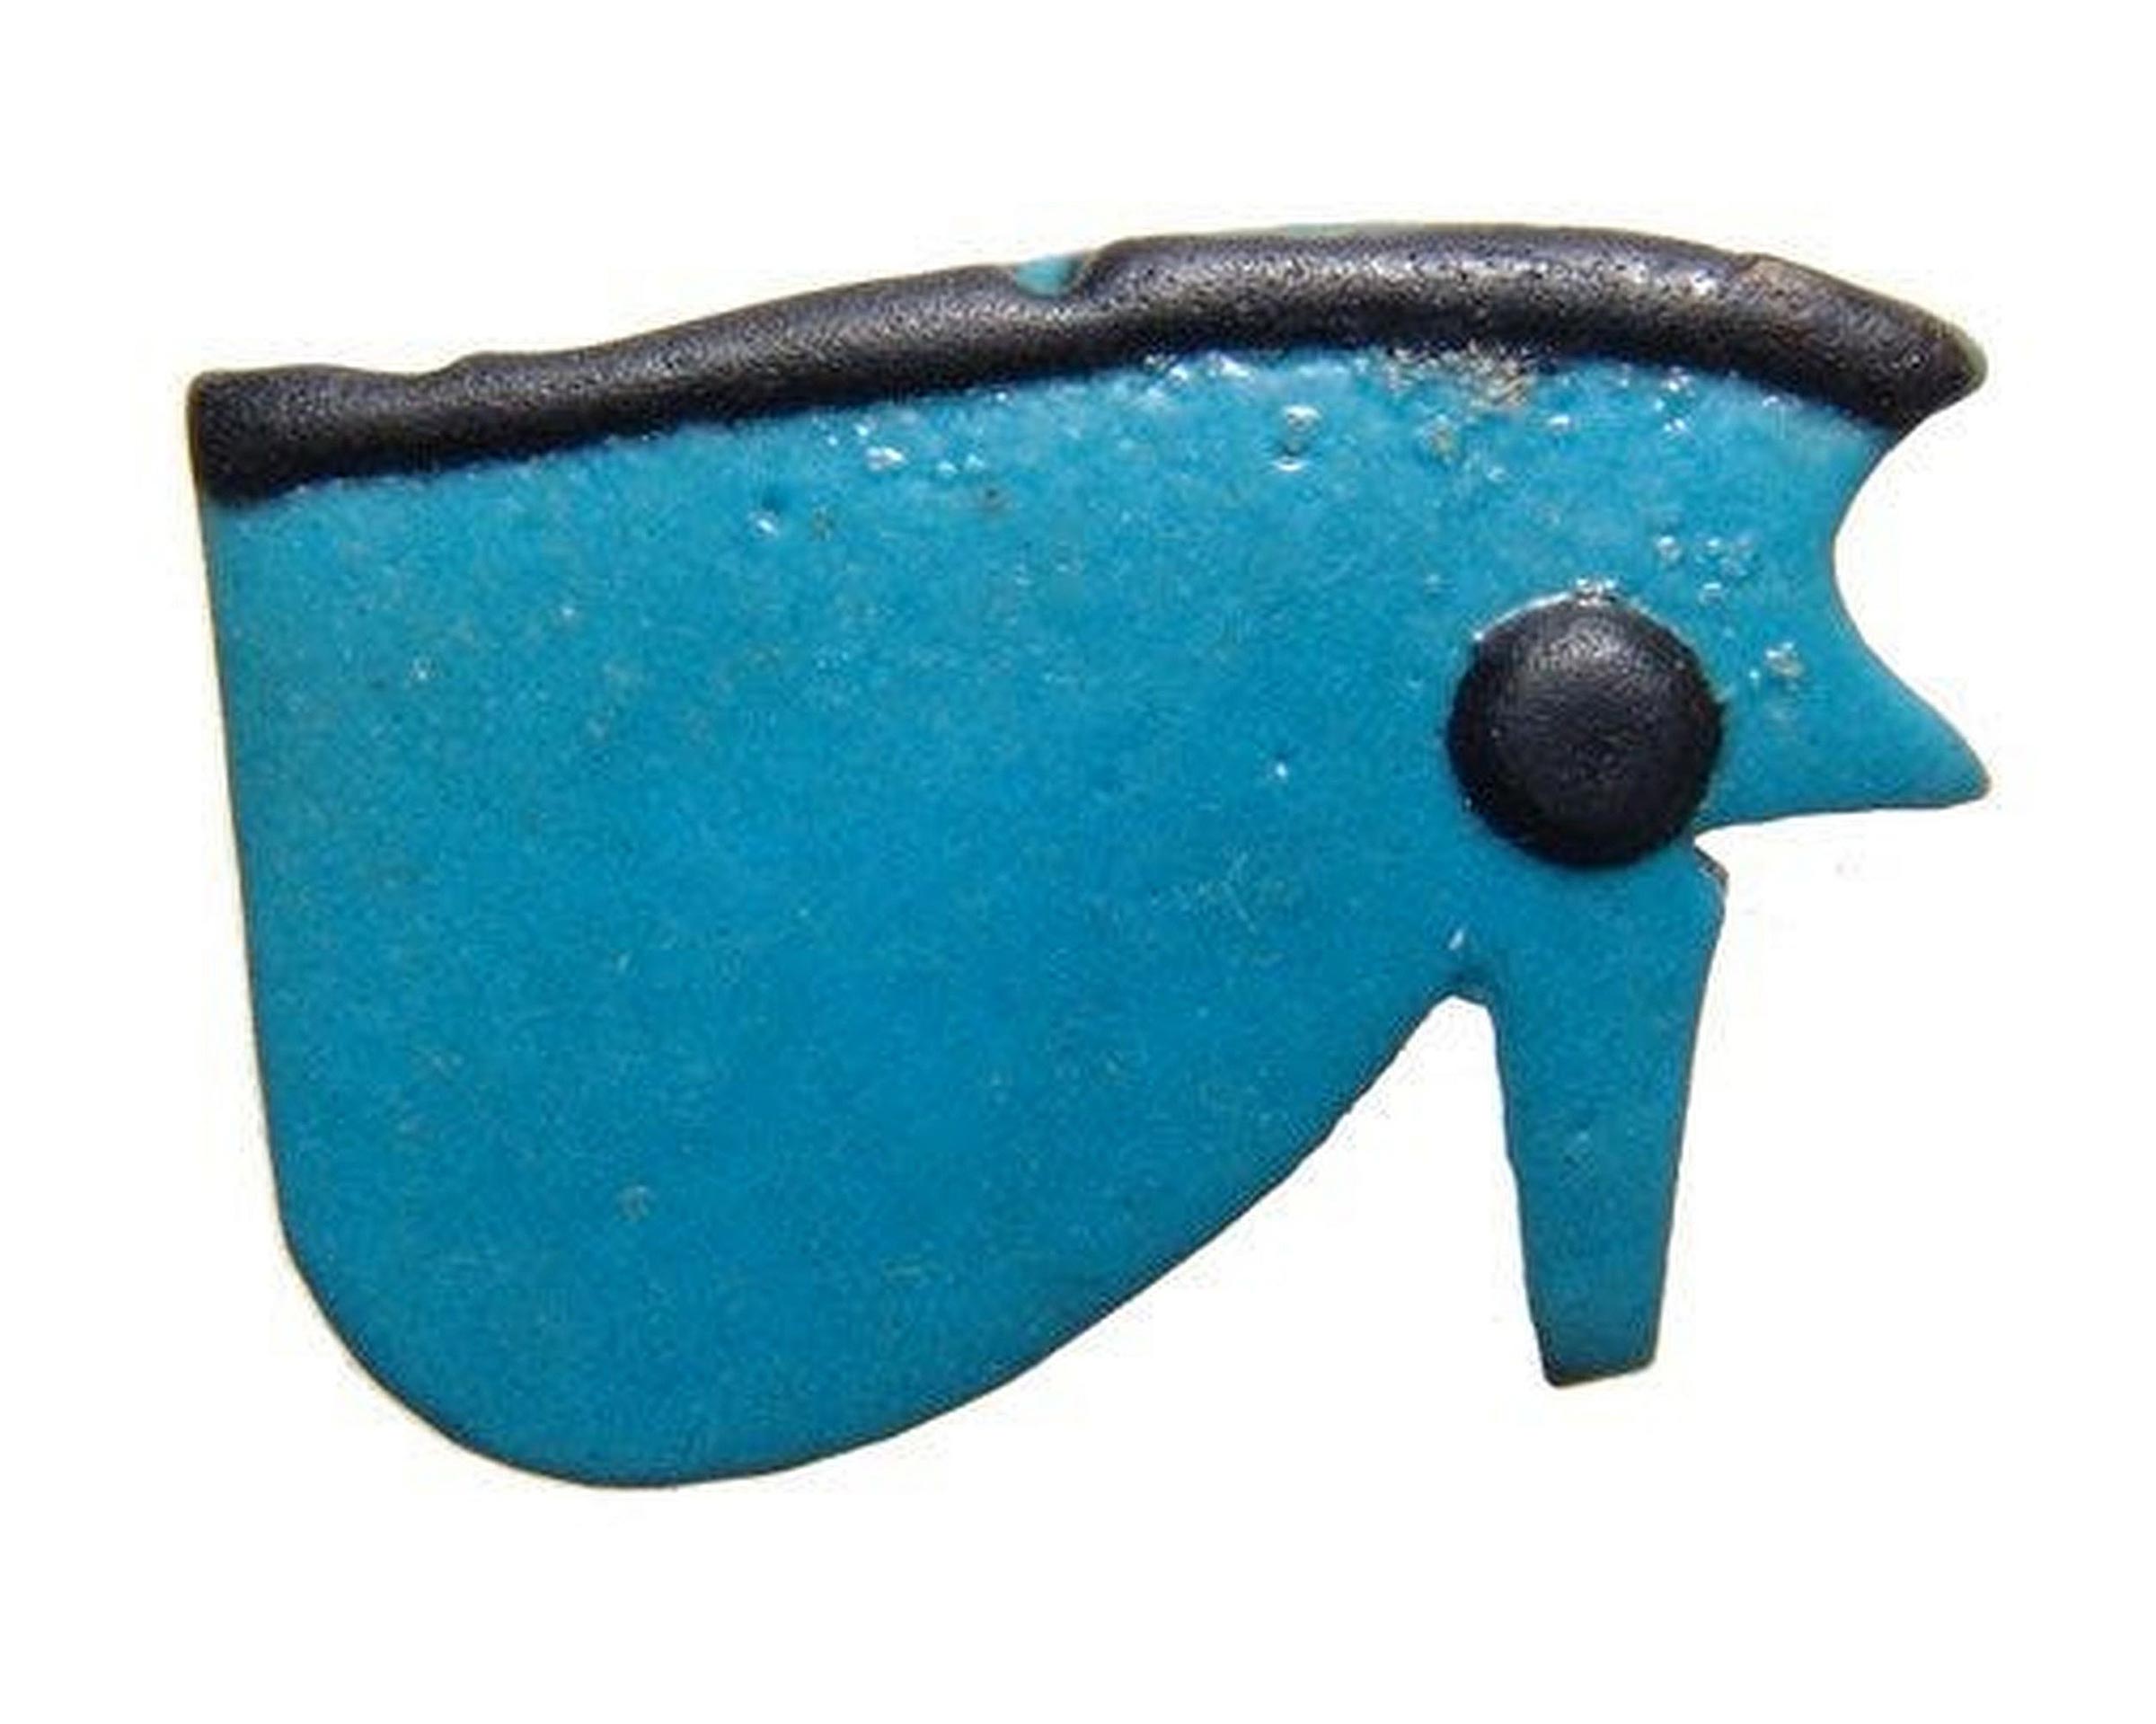 Vibrant Egyptian faience Eye of Horus amulet, c. 1075 - 664 BC, 1¼”, ex Boston Museum of Fine Arts. Realized $800 + buyer’s premium in 2015. Image courtesy Ancient Resource Auctions and LiveAuctioneers.